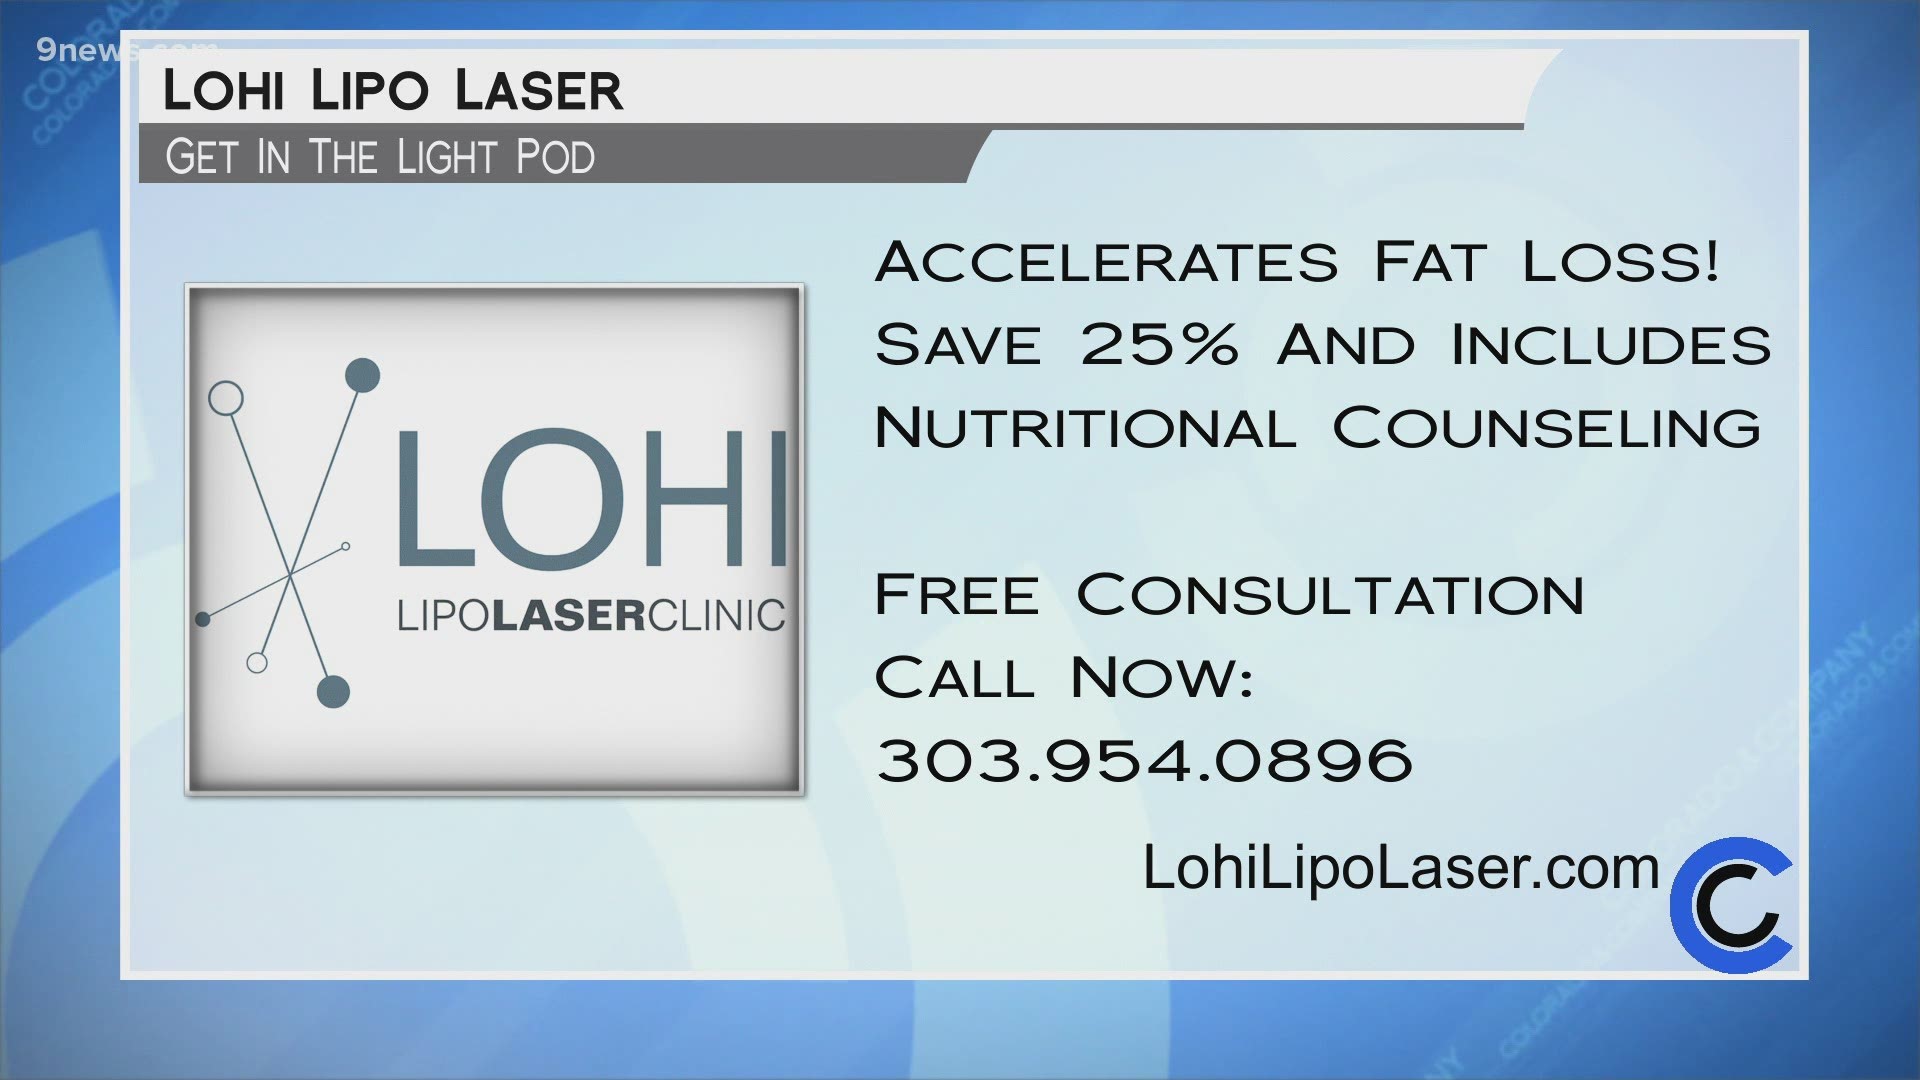 Book your appointment by calling 303.954.0896 or visit LohiLipoLaser.com. Get started with 25% off Light Pod protocol treatment.